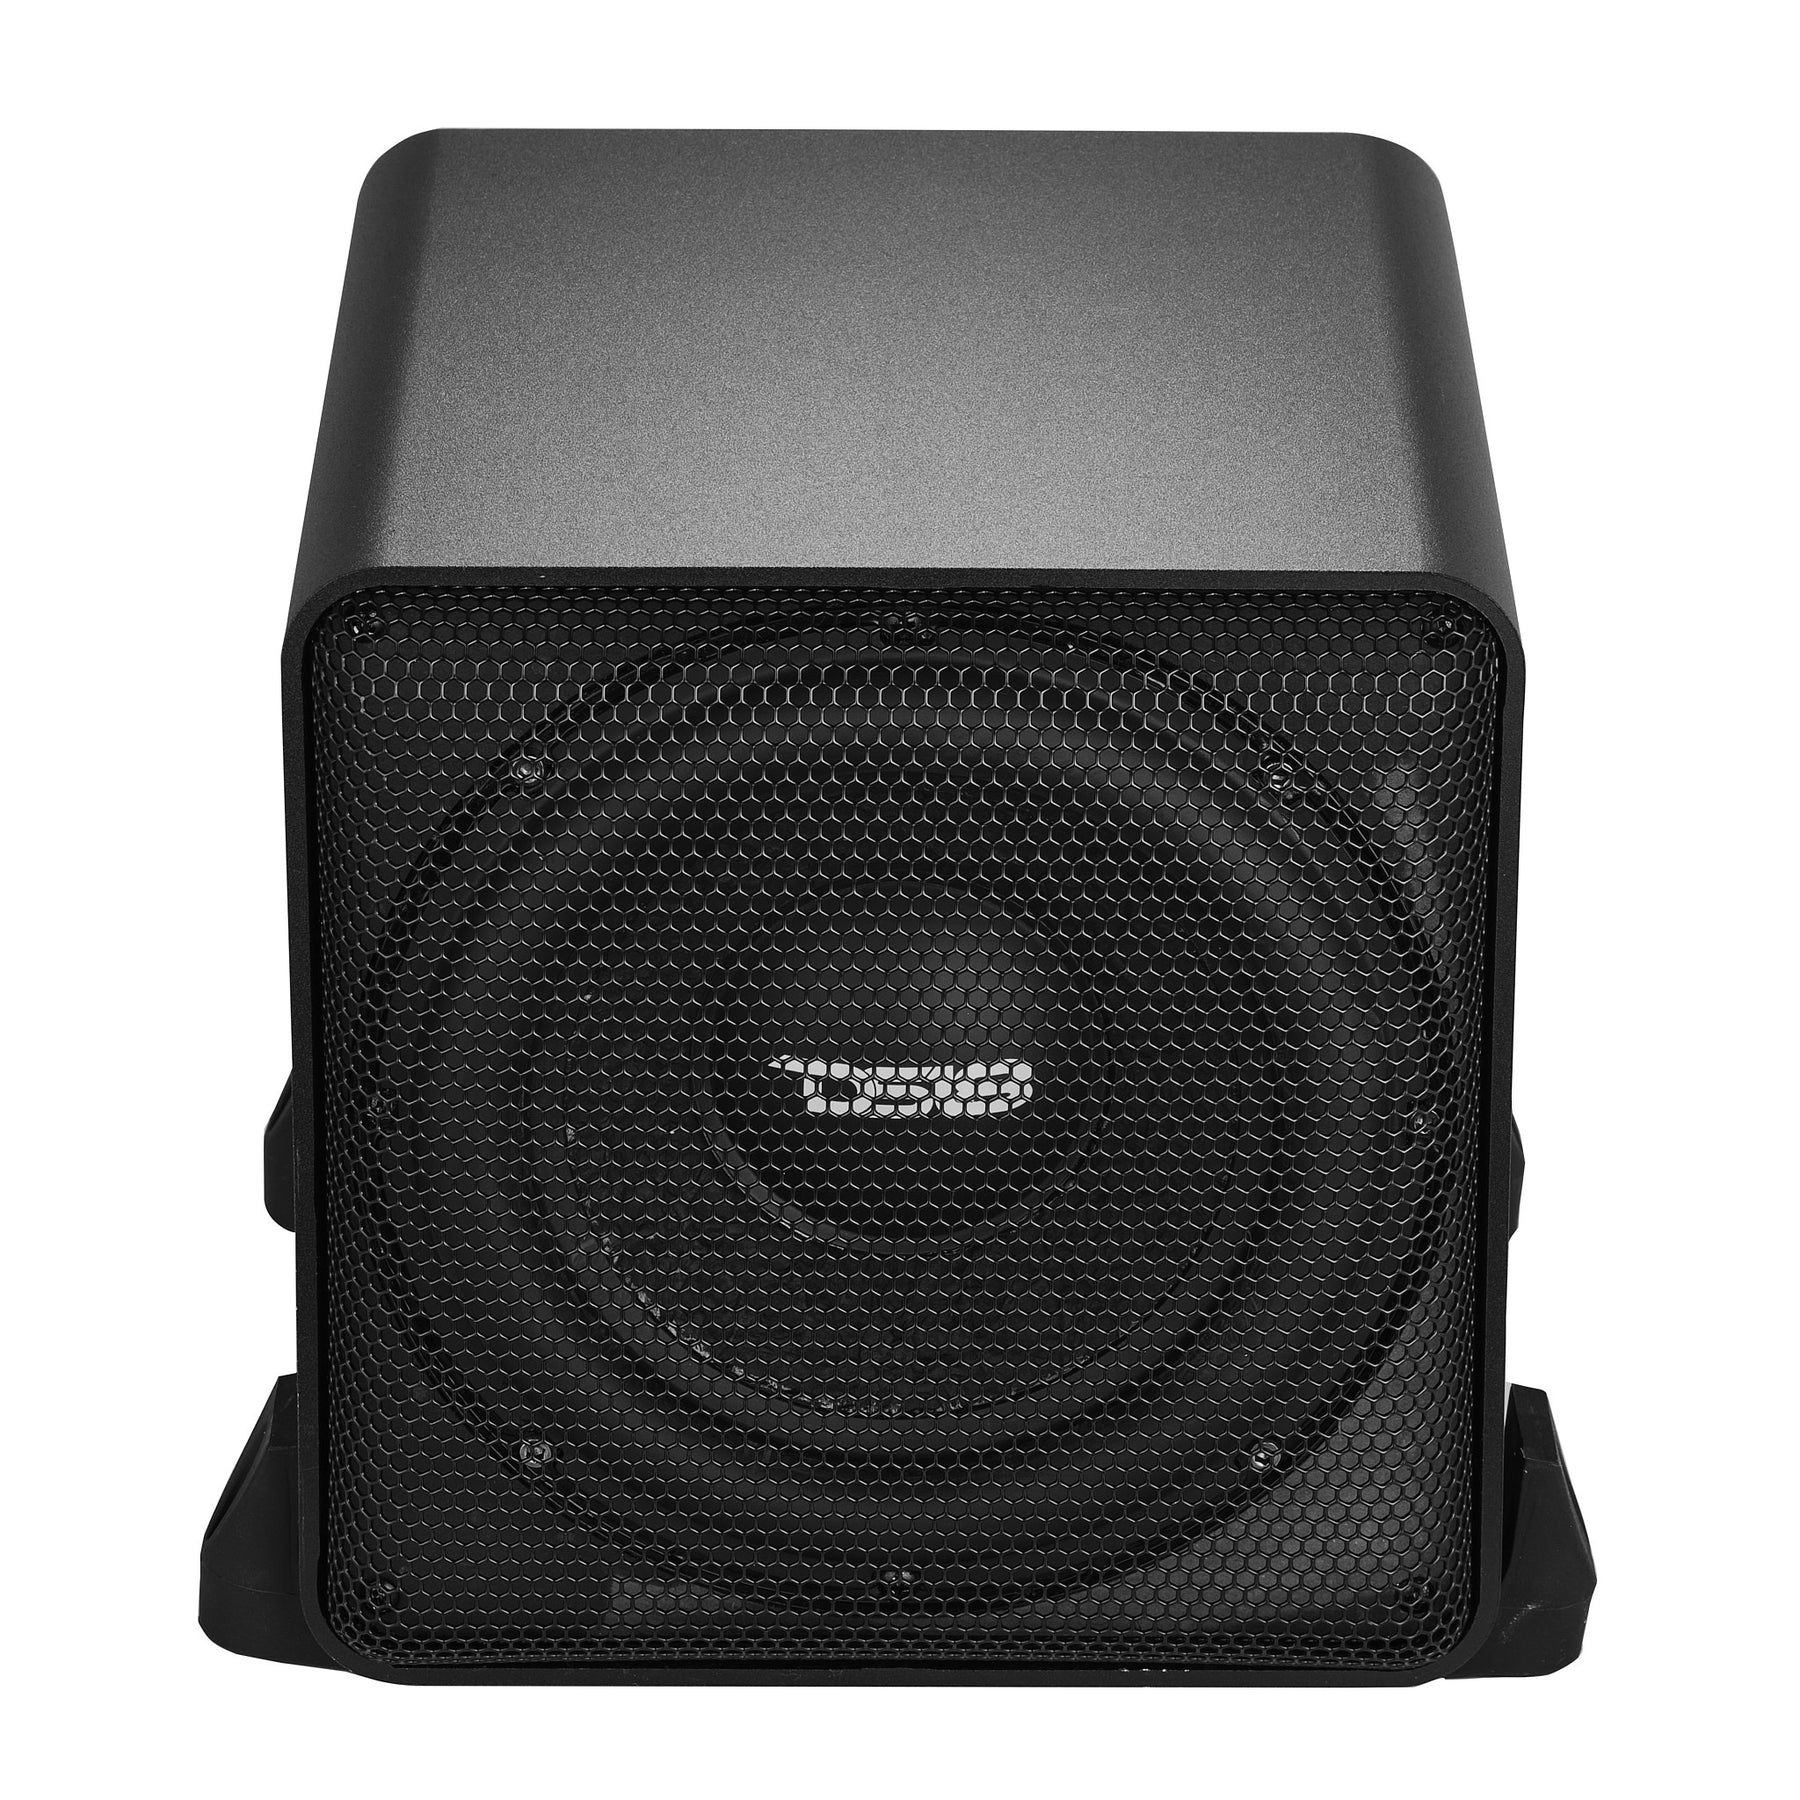 Dual 8" Loaded Amplified High End Aluminium Subwoofer Enclosure 300 Watts Rms